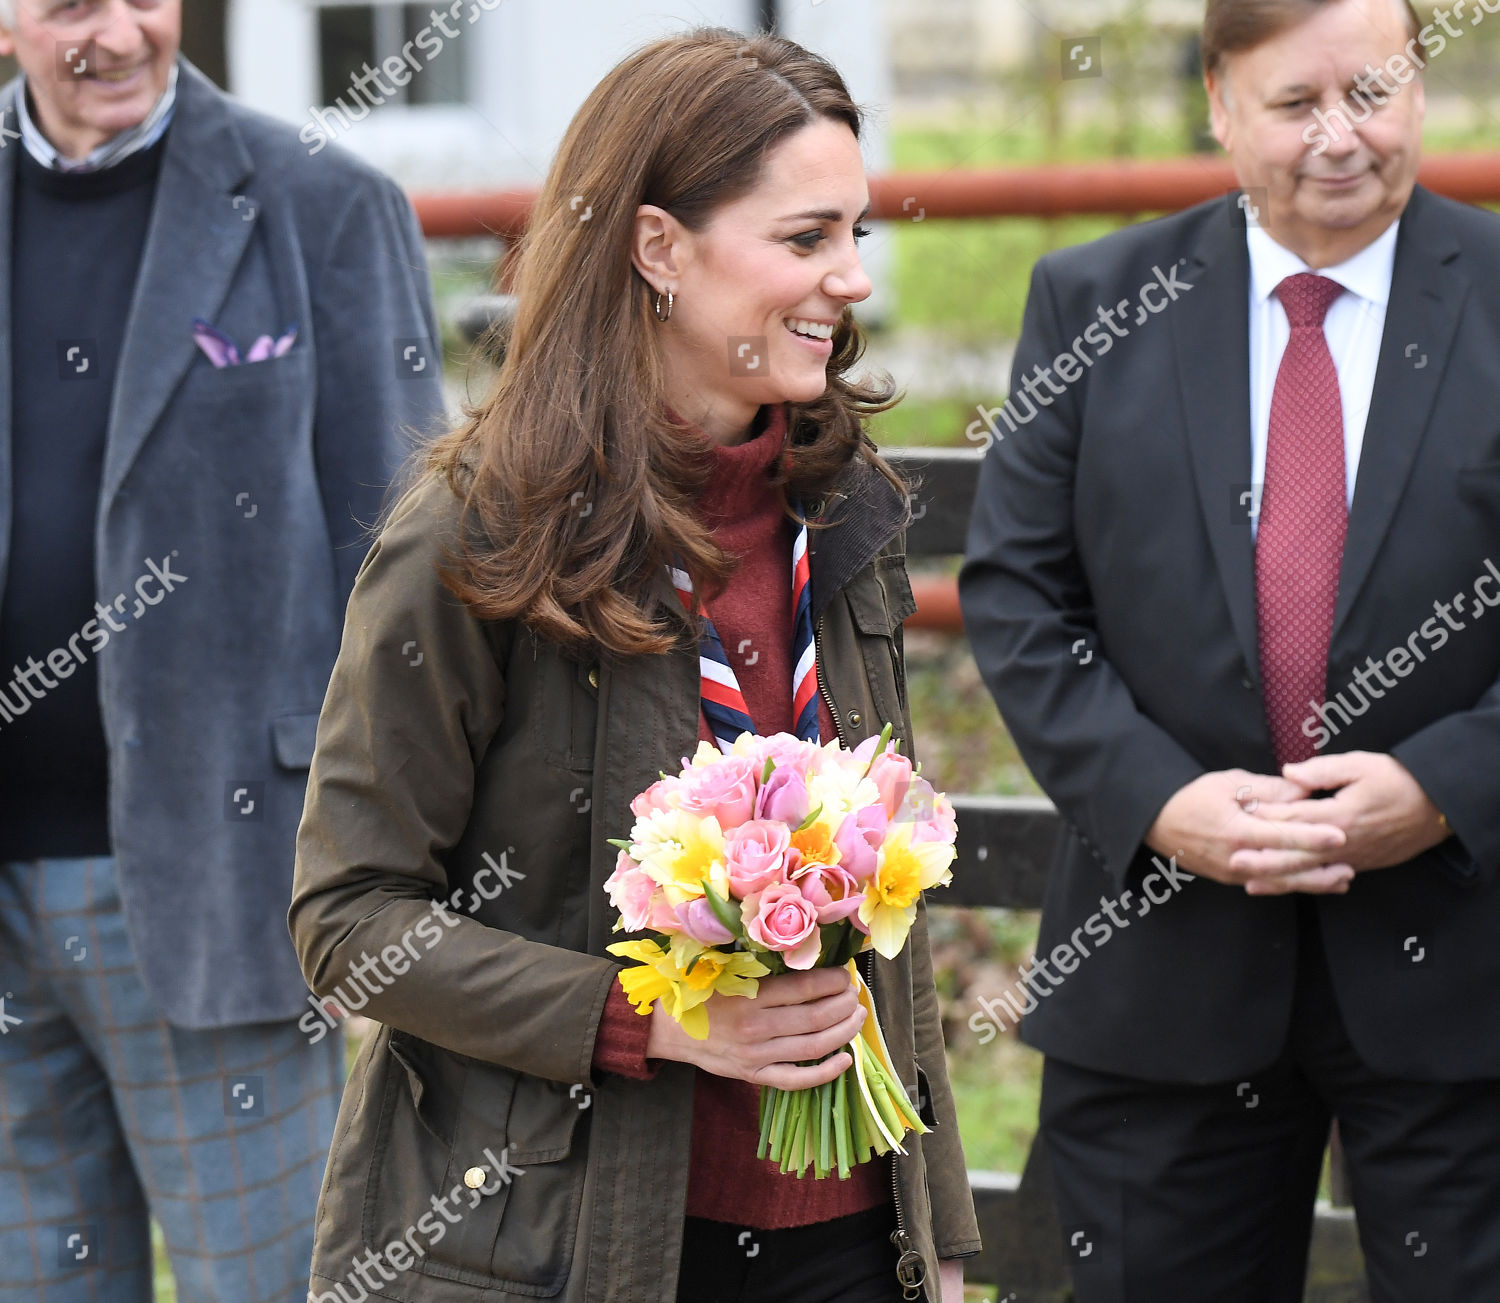 catherine-duchess-of-cambridge-visit-to-the-scouts-gilwell-park-essex-uk-shutterstock-editorial-10179979a.jpg